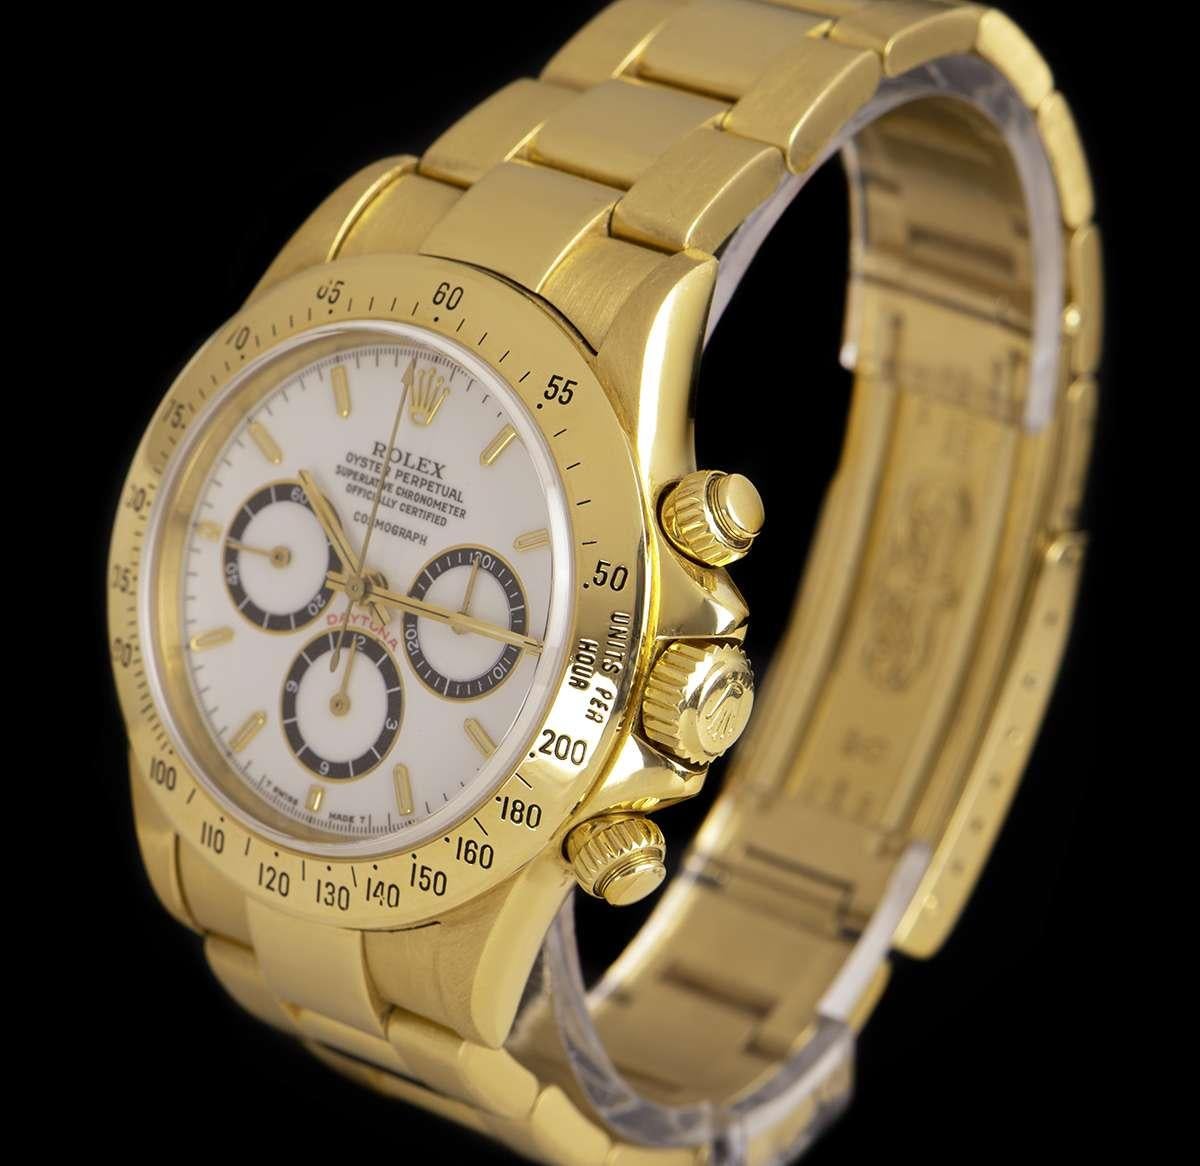 A 40 mm 18k Yellow Gold Oyster Perpetual Zenith Movement Cosmograph Daytona Gents Wristwatch, rare floating white porcelain dial with applied hour markers, 30 minute recorder at 3 0'clock, 12 hour recorder with inverted 6 at 6 0'clock, small seconds